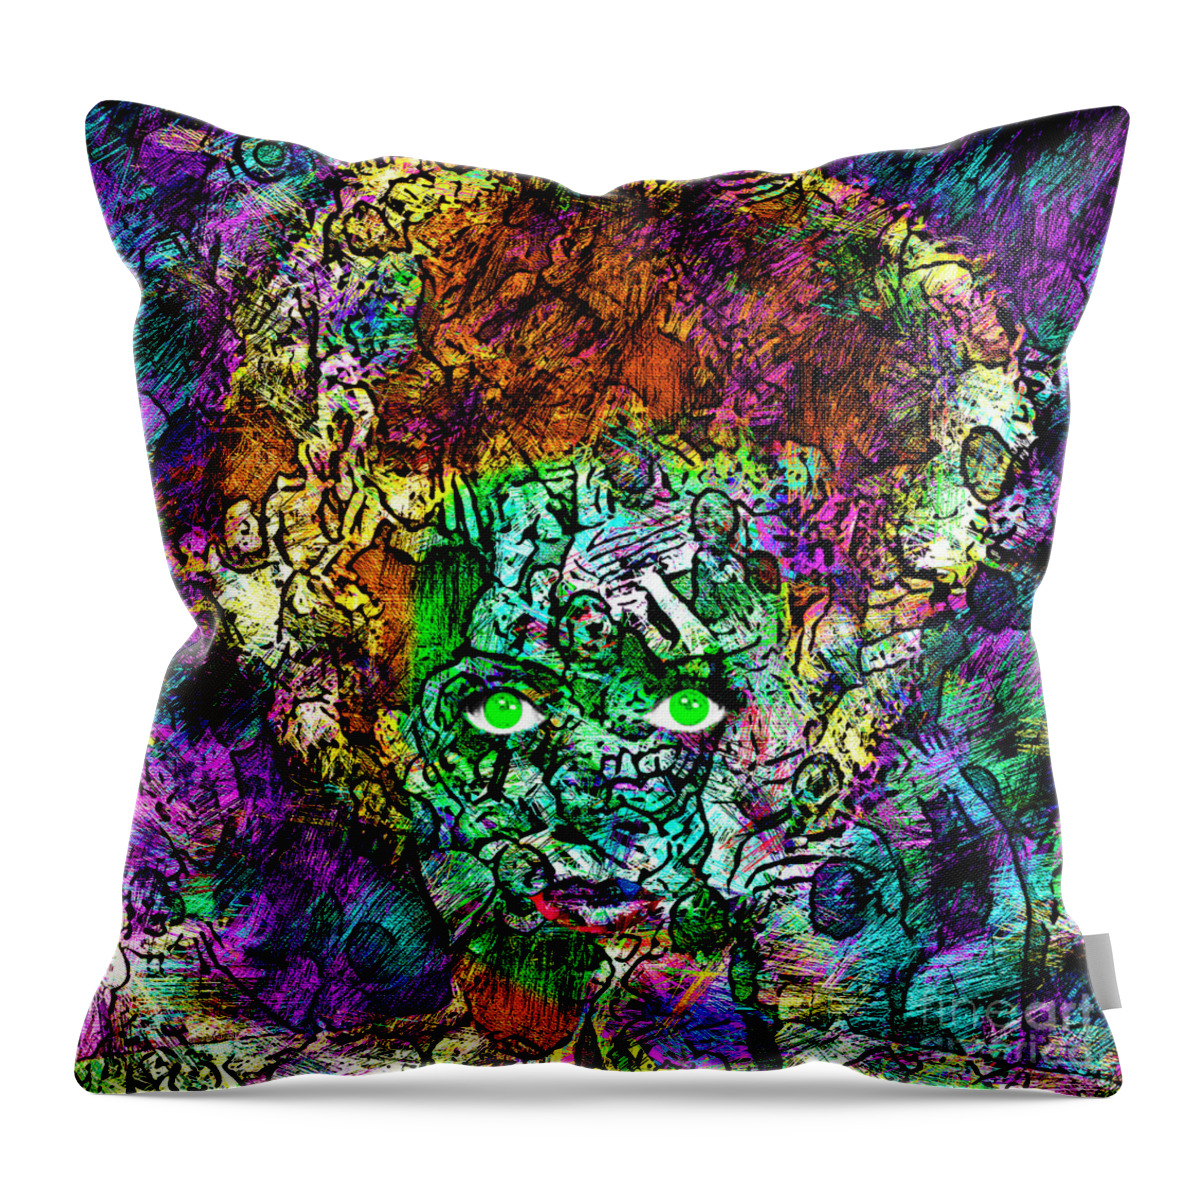 Wingsdomain Throw Pillow featuring the photograph Bride of Frankenstein 20170407 by Wingsdomain Art and Photography